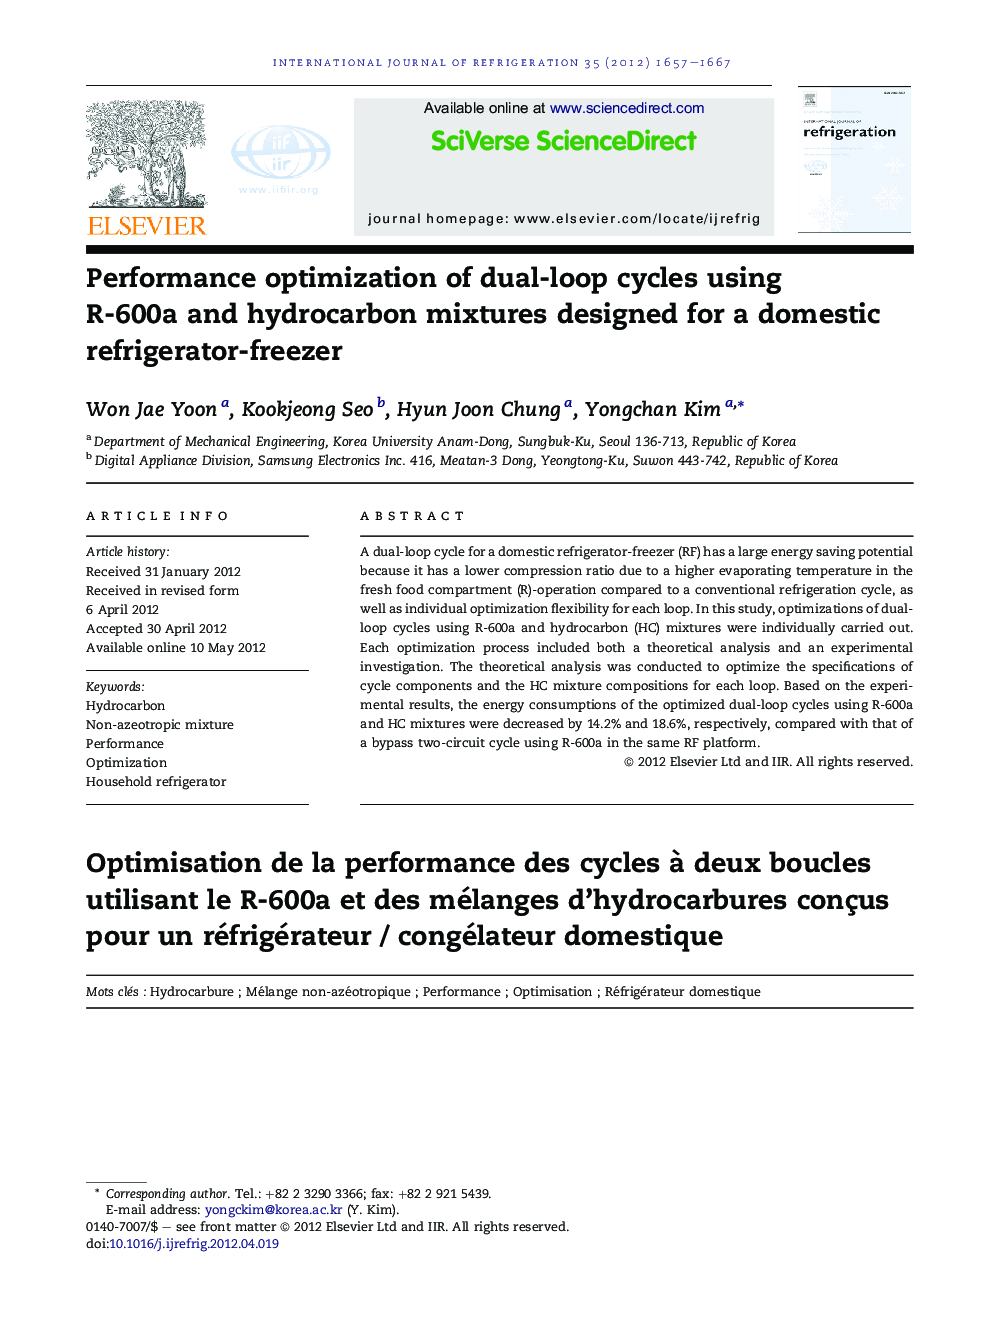 Performance optimization of dual-loop cycles using R-600a and hydrocarbon mixtures designed for a domestic refrigerator-freezer